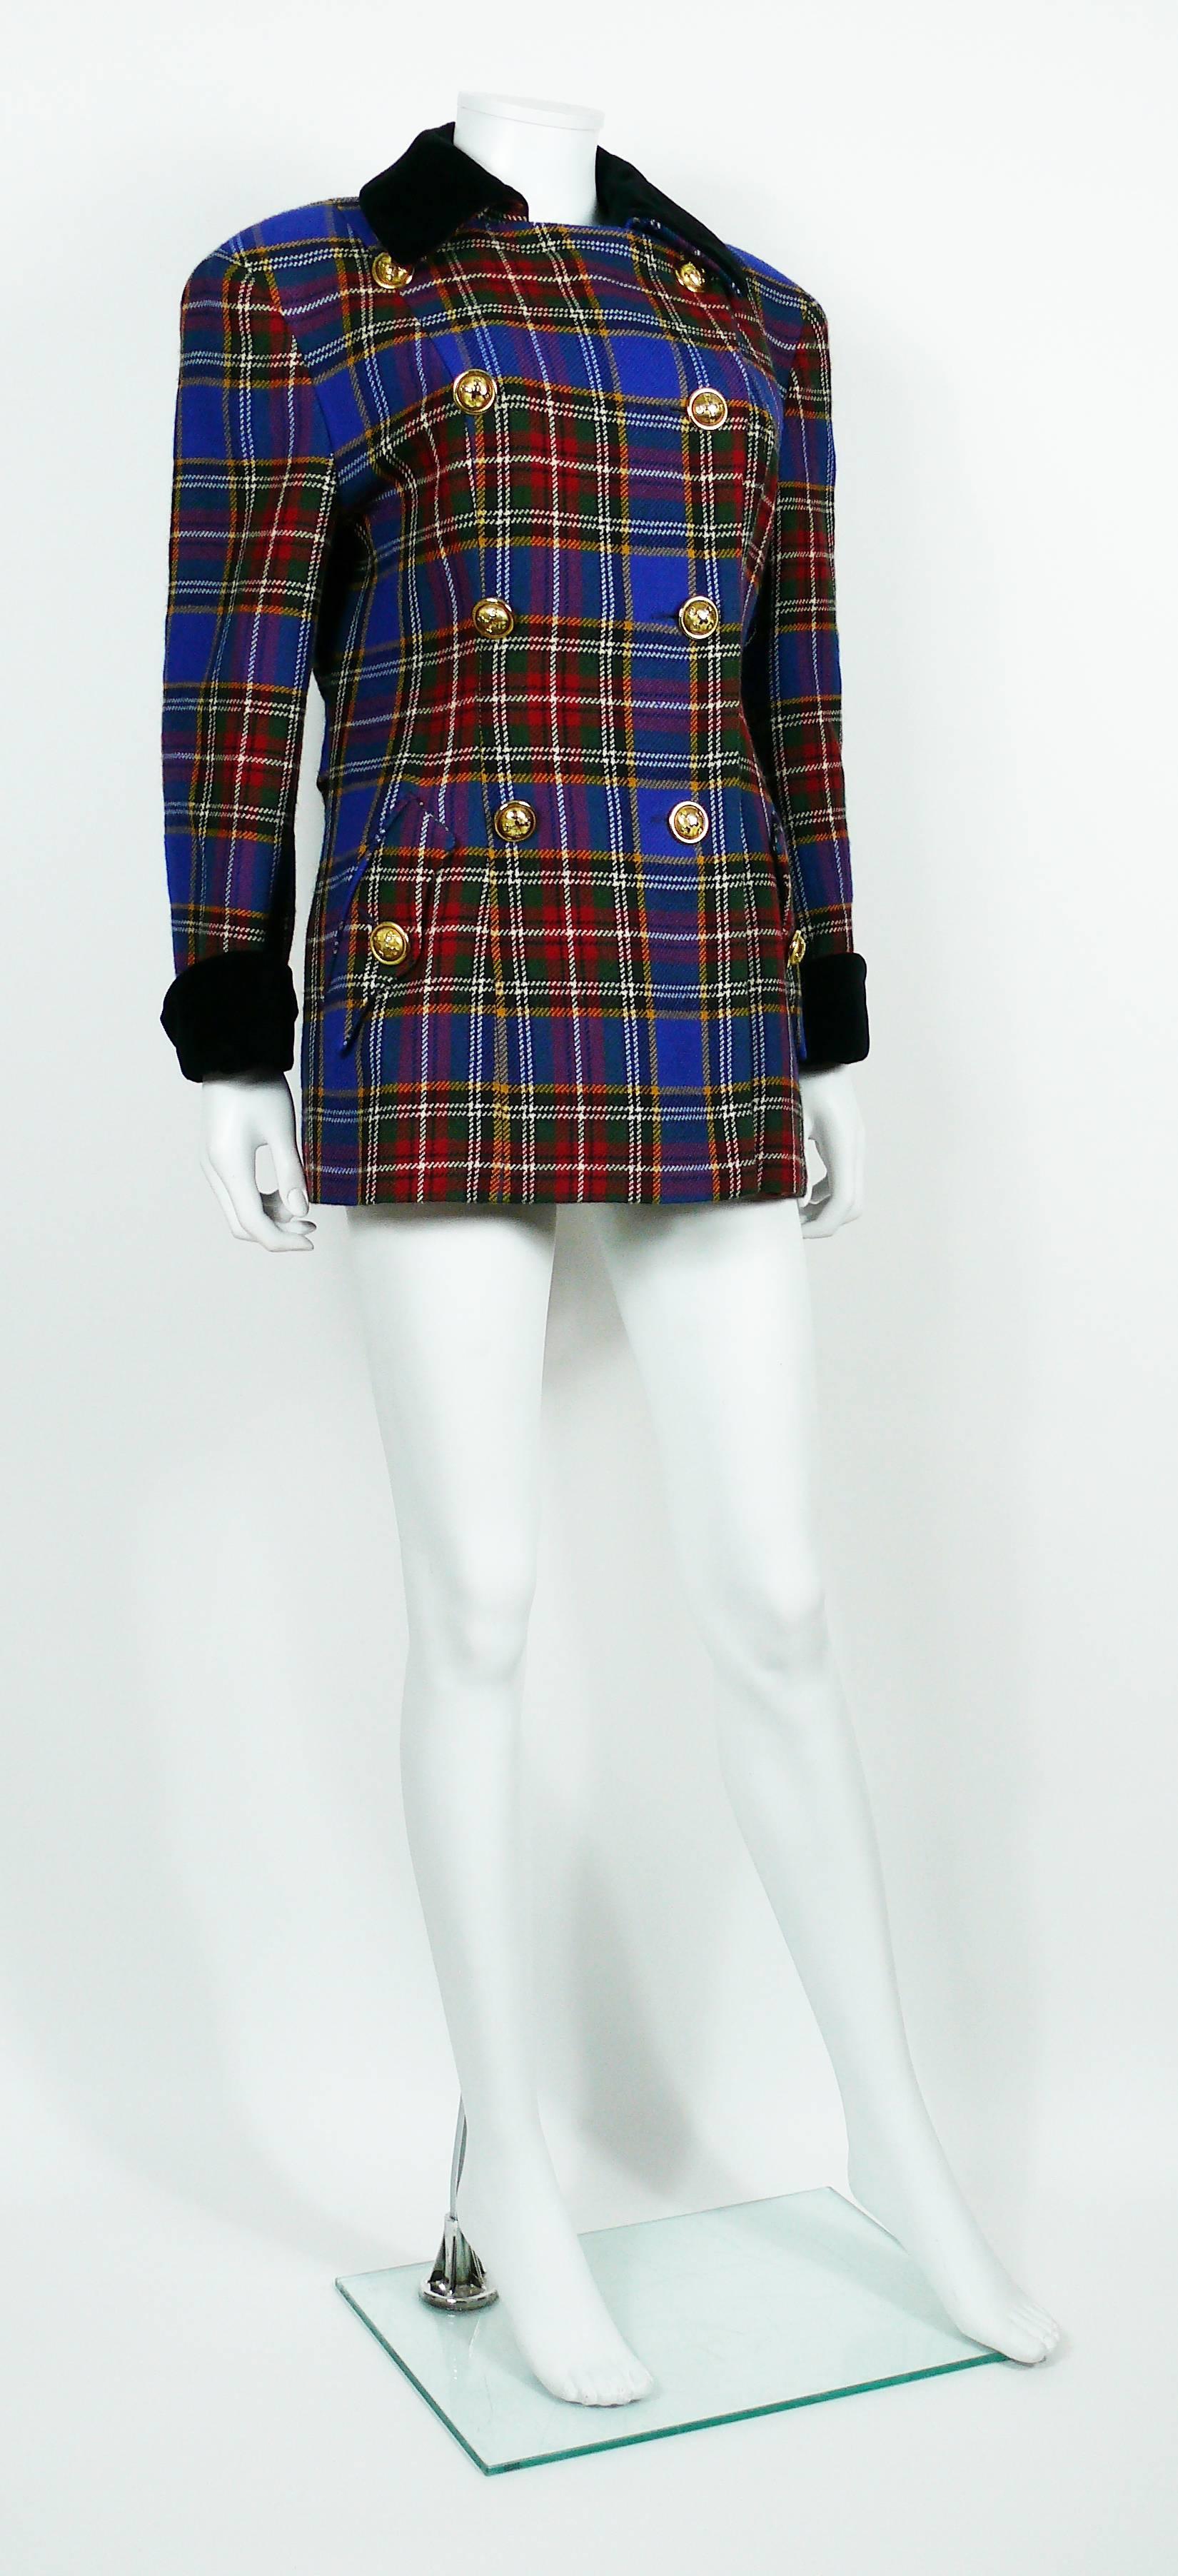 MOSCHINO vintage iconic wool tartan plaid  double-breasted jacket.

This jacket features :
- Lapel collar.
- Black velvet on collar and cuffs.
- Gold toned buttons.
- Fully lined.
- Two pockets.
- Long sleeves.
- Half belt.

Label reads CHEAP AND